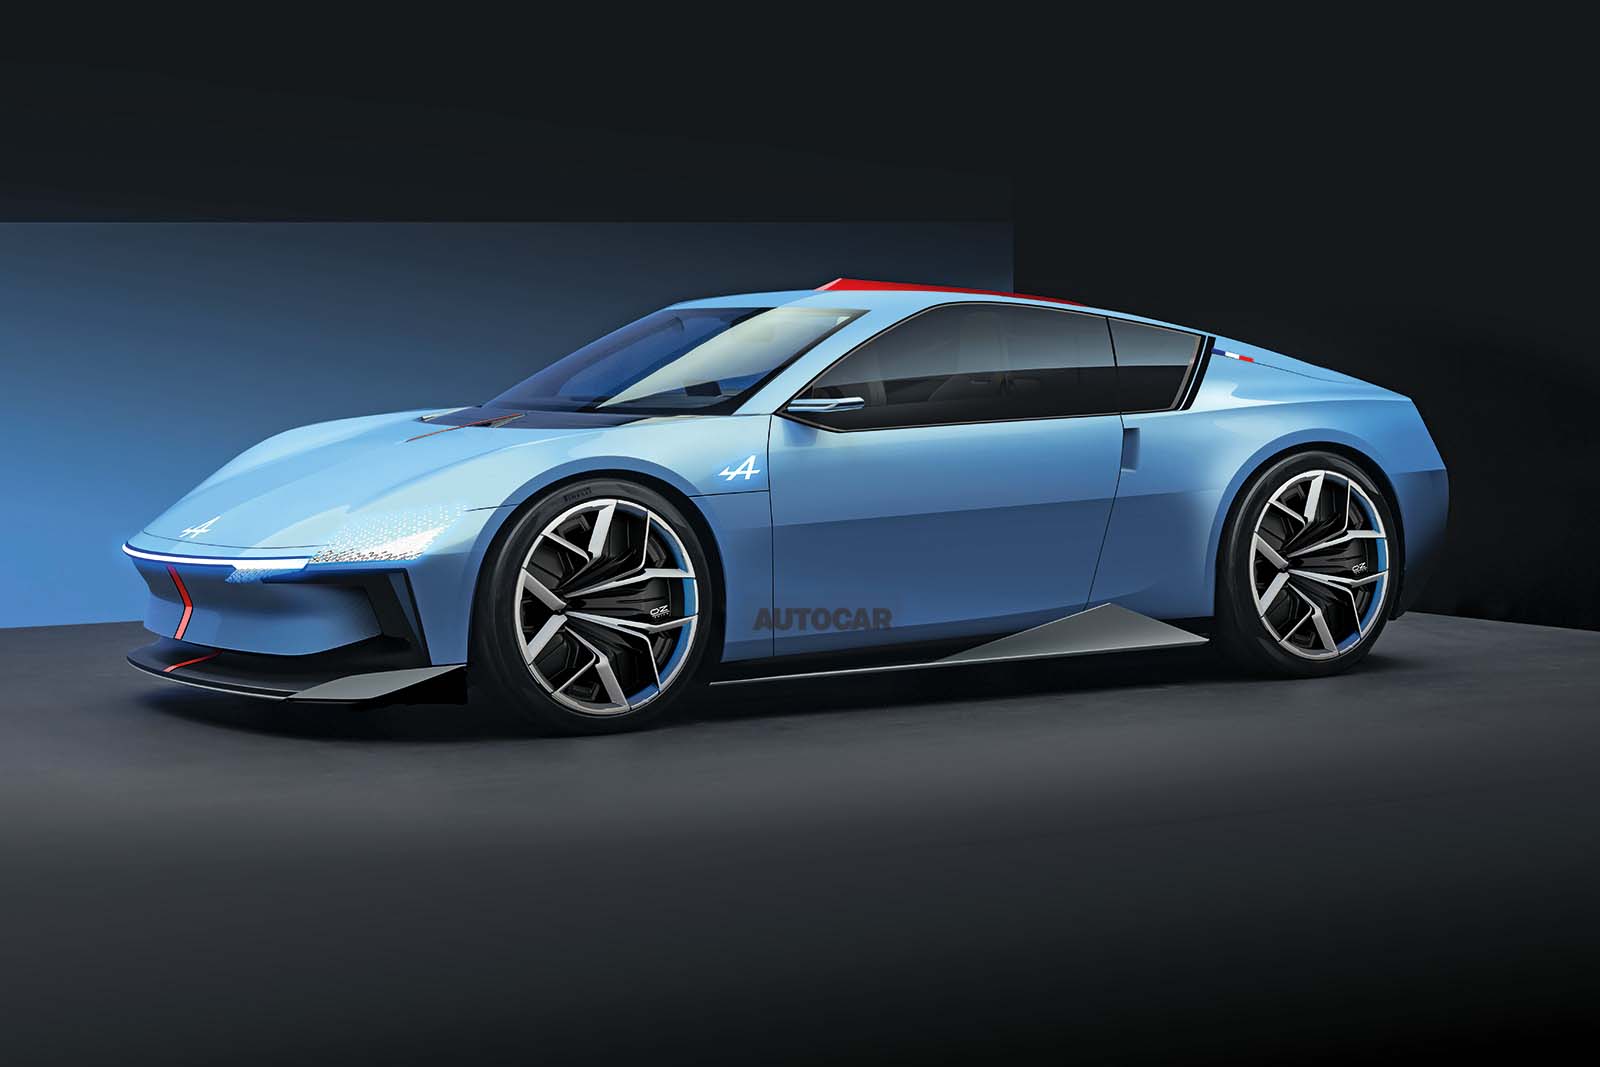 New Alpine A310 inbound as electric, four-seat A110